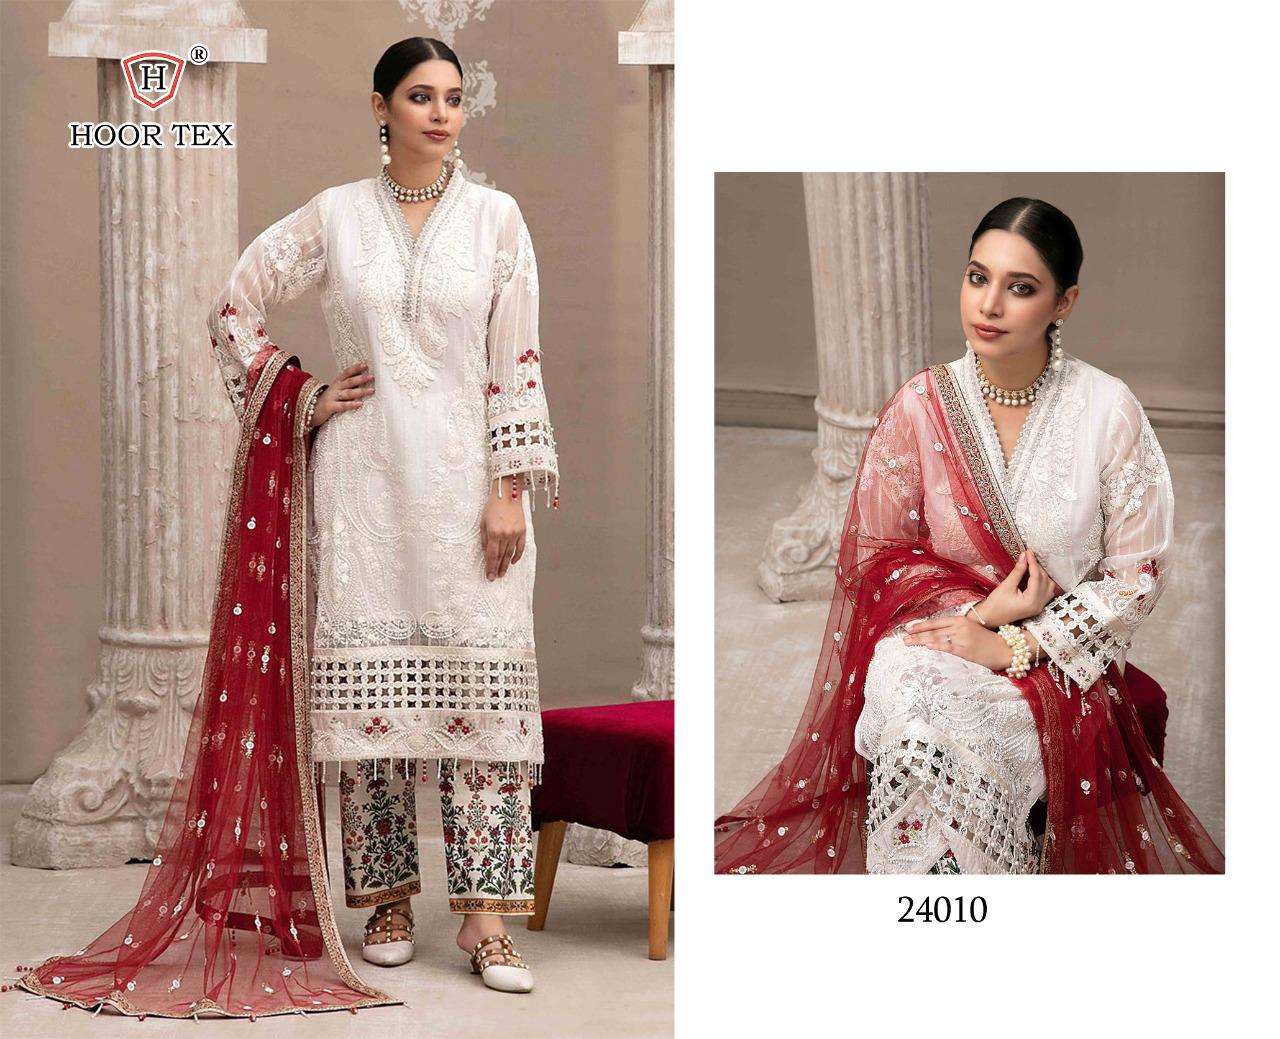 Hoor tex 24010 Georgette with Embroidery Work Pakistani Suit